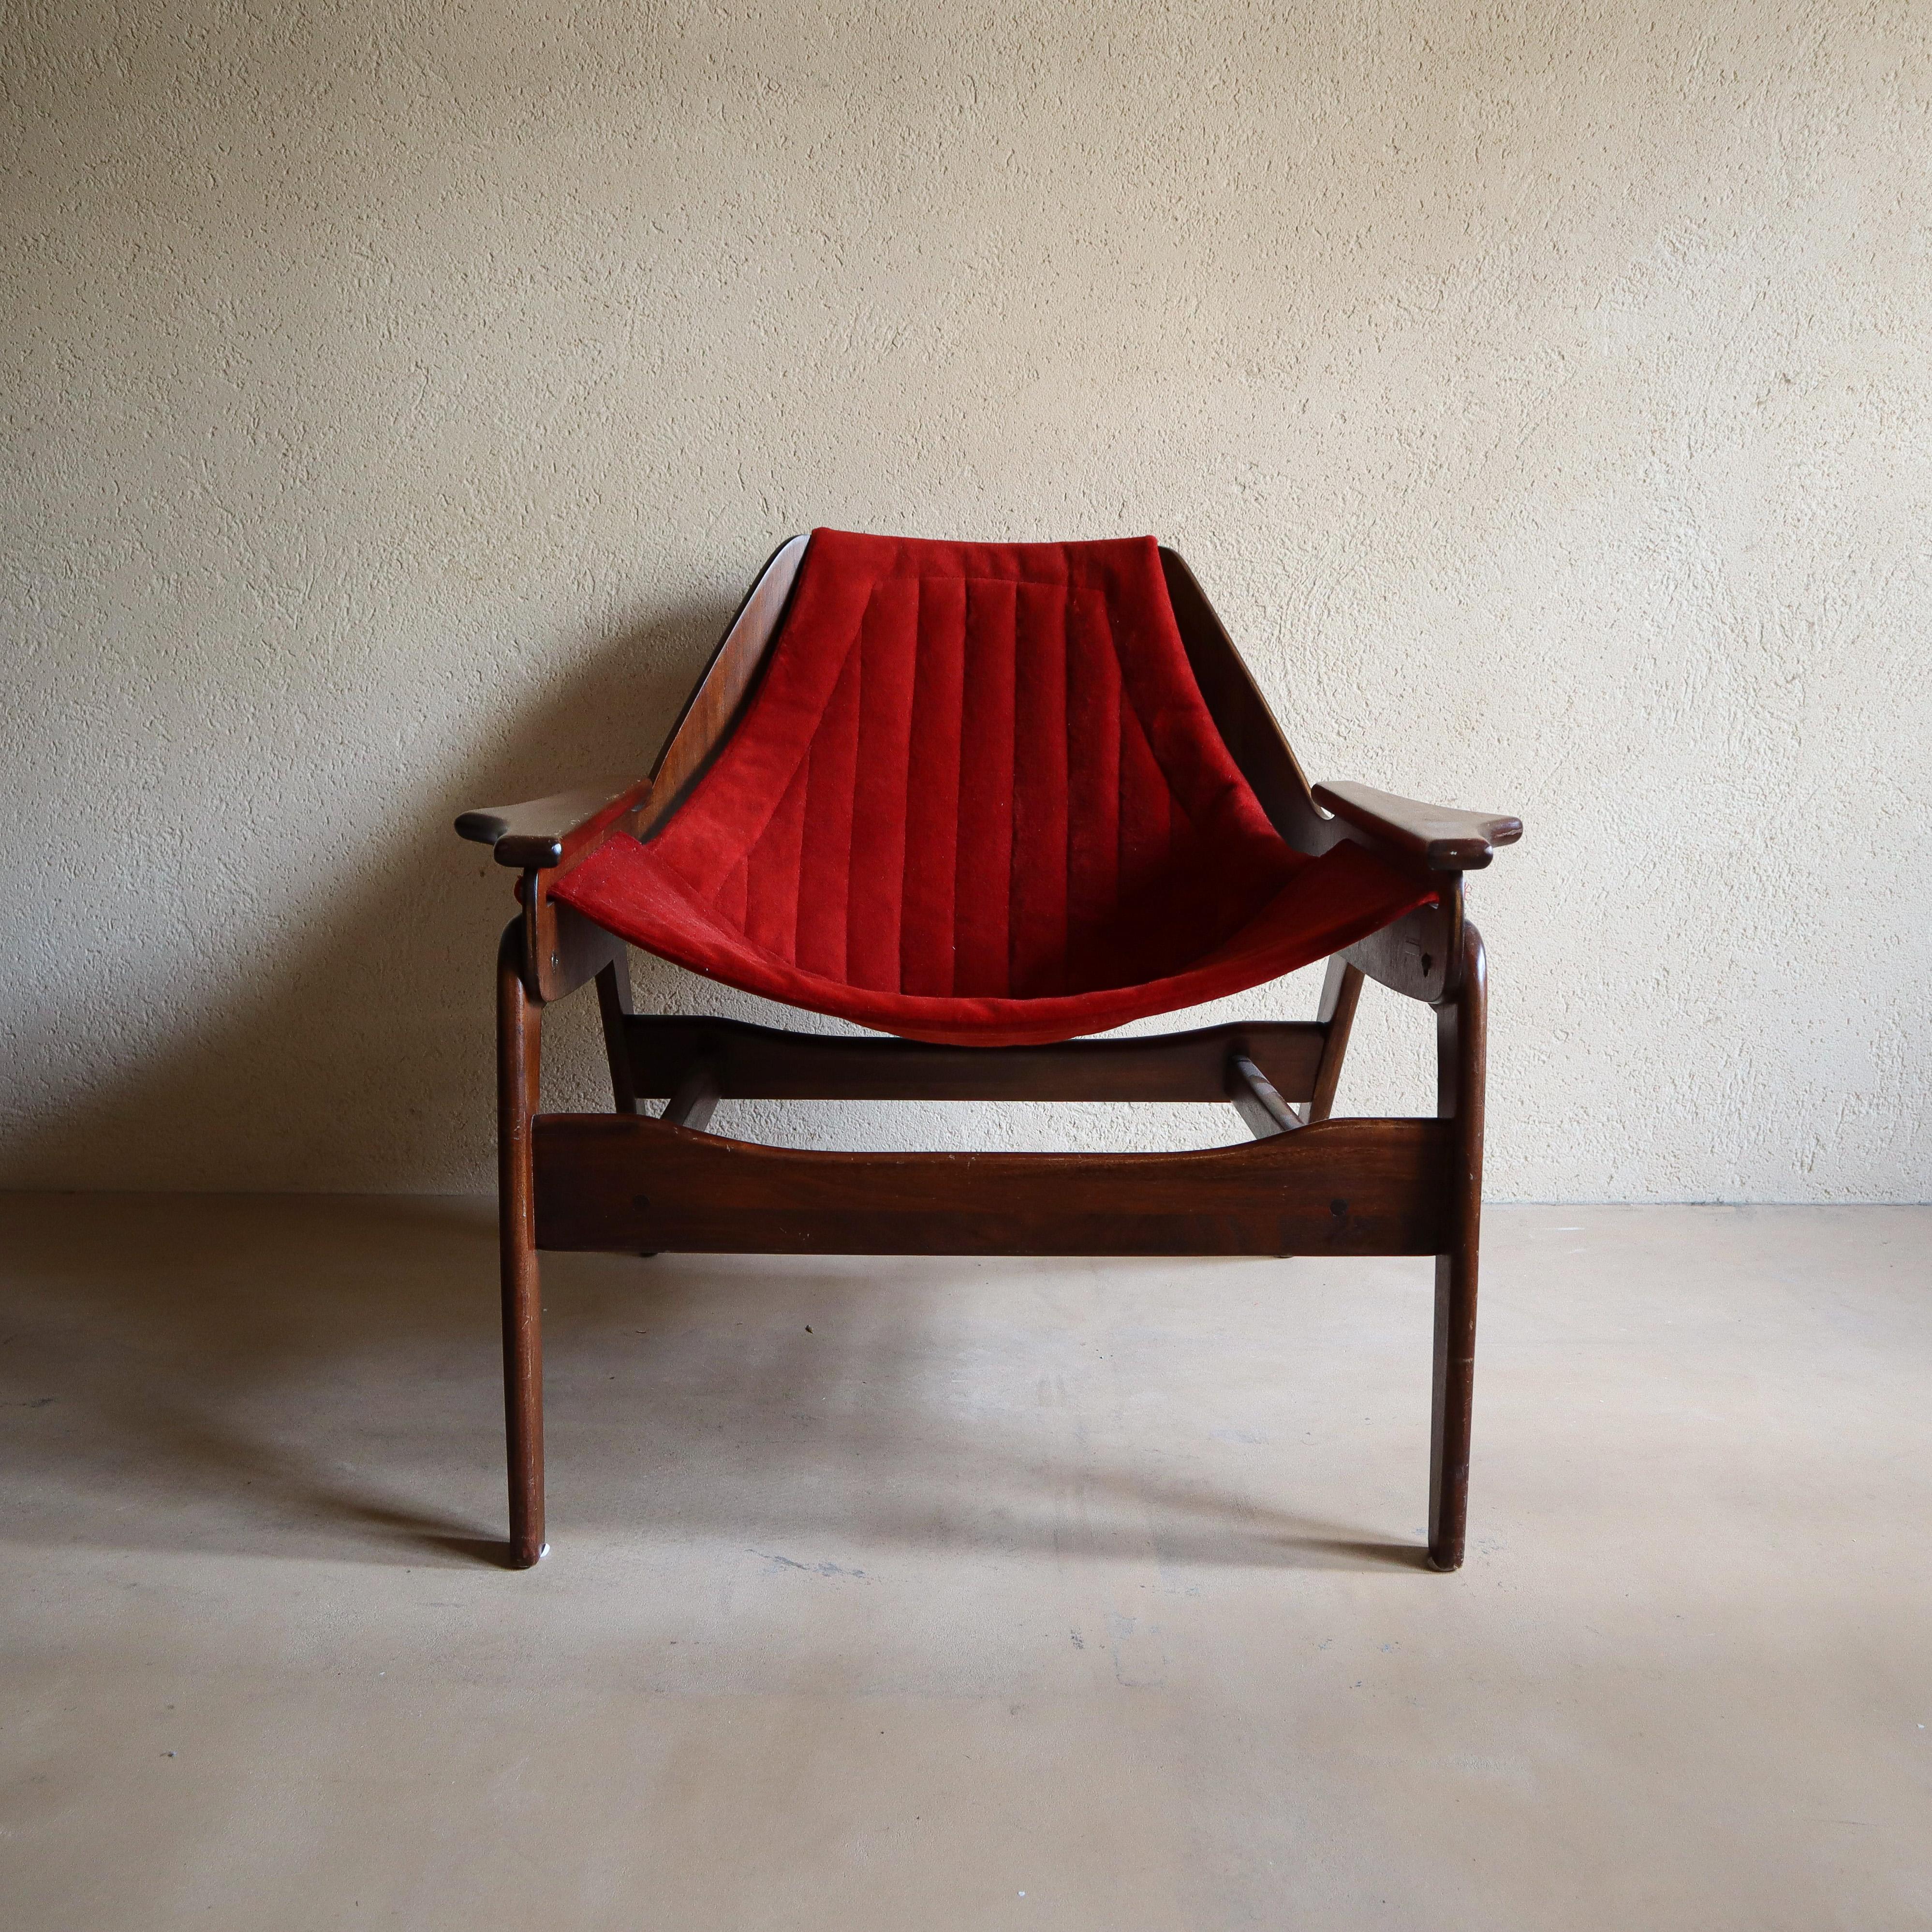 Iconic Mid-Century Modern design, this sling chair was designed by California furniture designer Jerry Johnson in the 1960s. Featuring a solid walnut frame and velvet upholstery, this chair will brighten up any interior.

Designer: Jerry Johnson